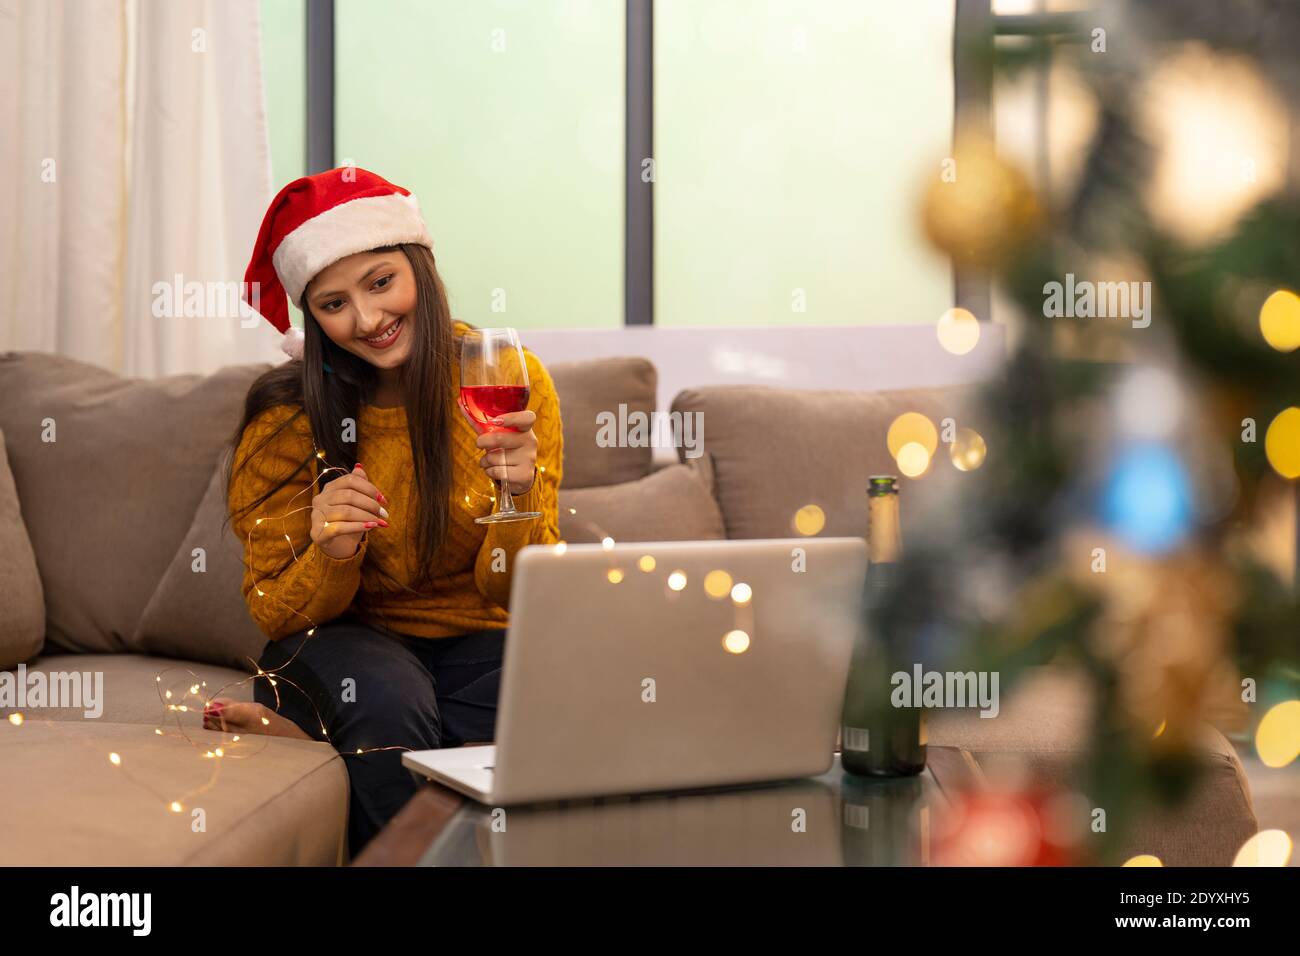 Happy Woman Making Video Call During Christmas Celebration holding wine glass Stock Photo